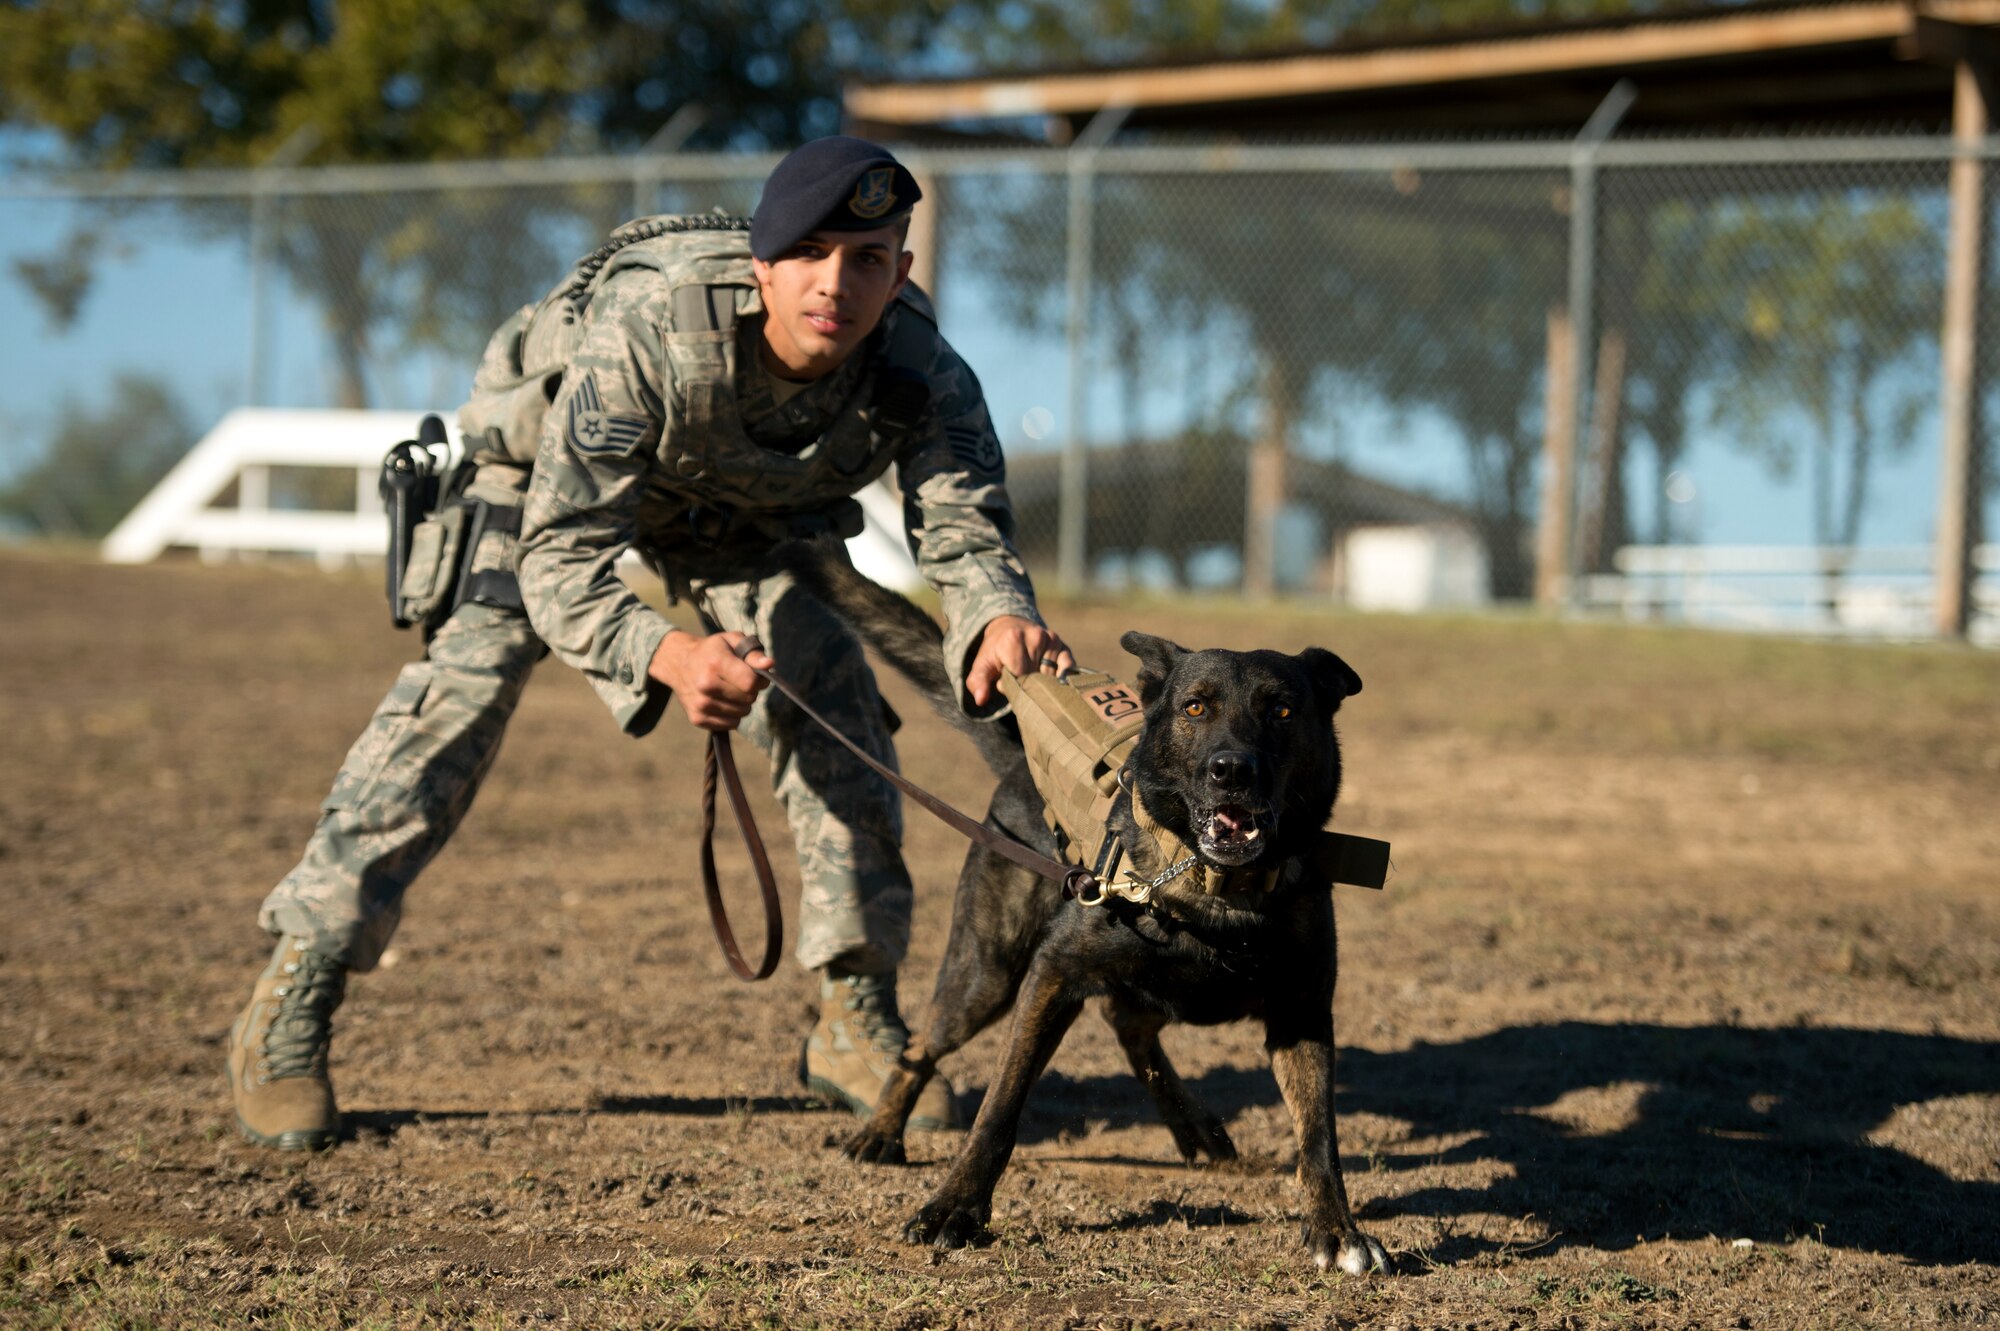 Staff Sgt. Mark Devine, a military working dog handler from the 802nd Security Forces Squadron, holds JJany during a morning training session at Joint Base San Antonio-Lackland. Devine and military working dog handlers assigned to JBSA-Lackland fulfill daily law enforcement requirements or train to remain mission-ready. (U.S. Air force photo/Staff Sgt. Vernon Young Jr.)